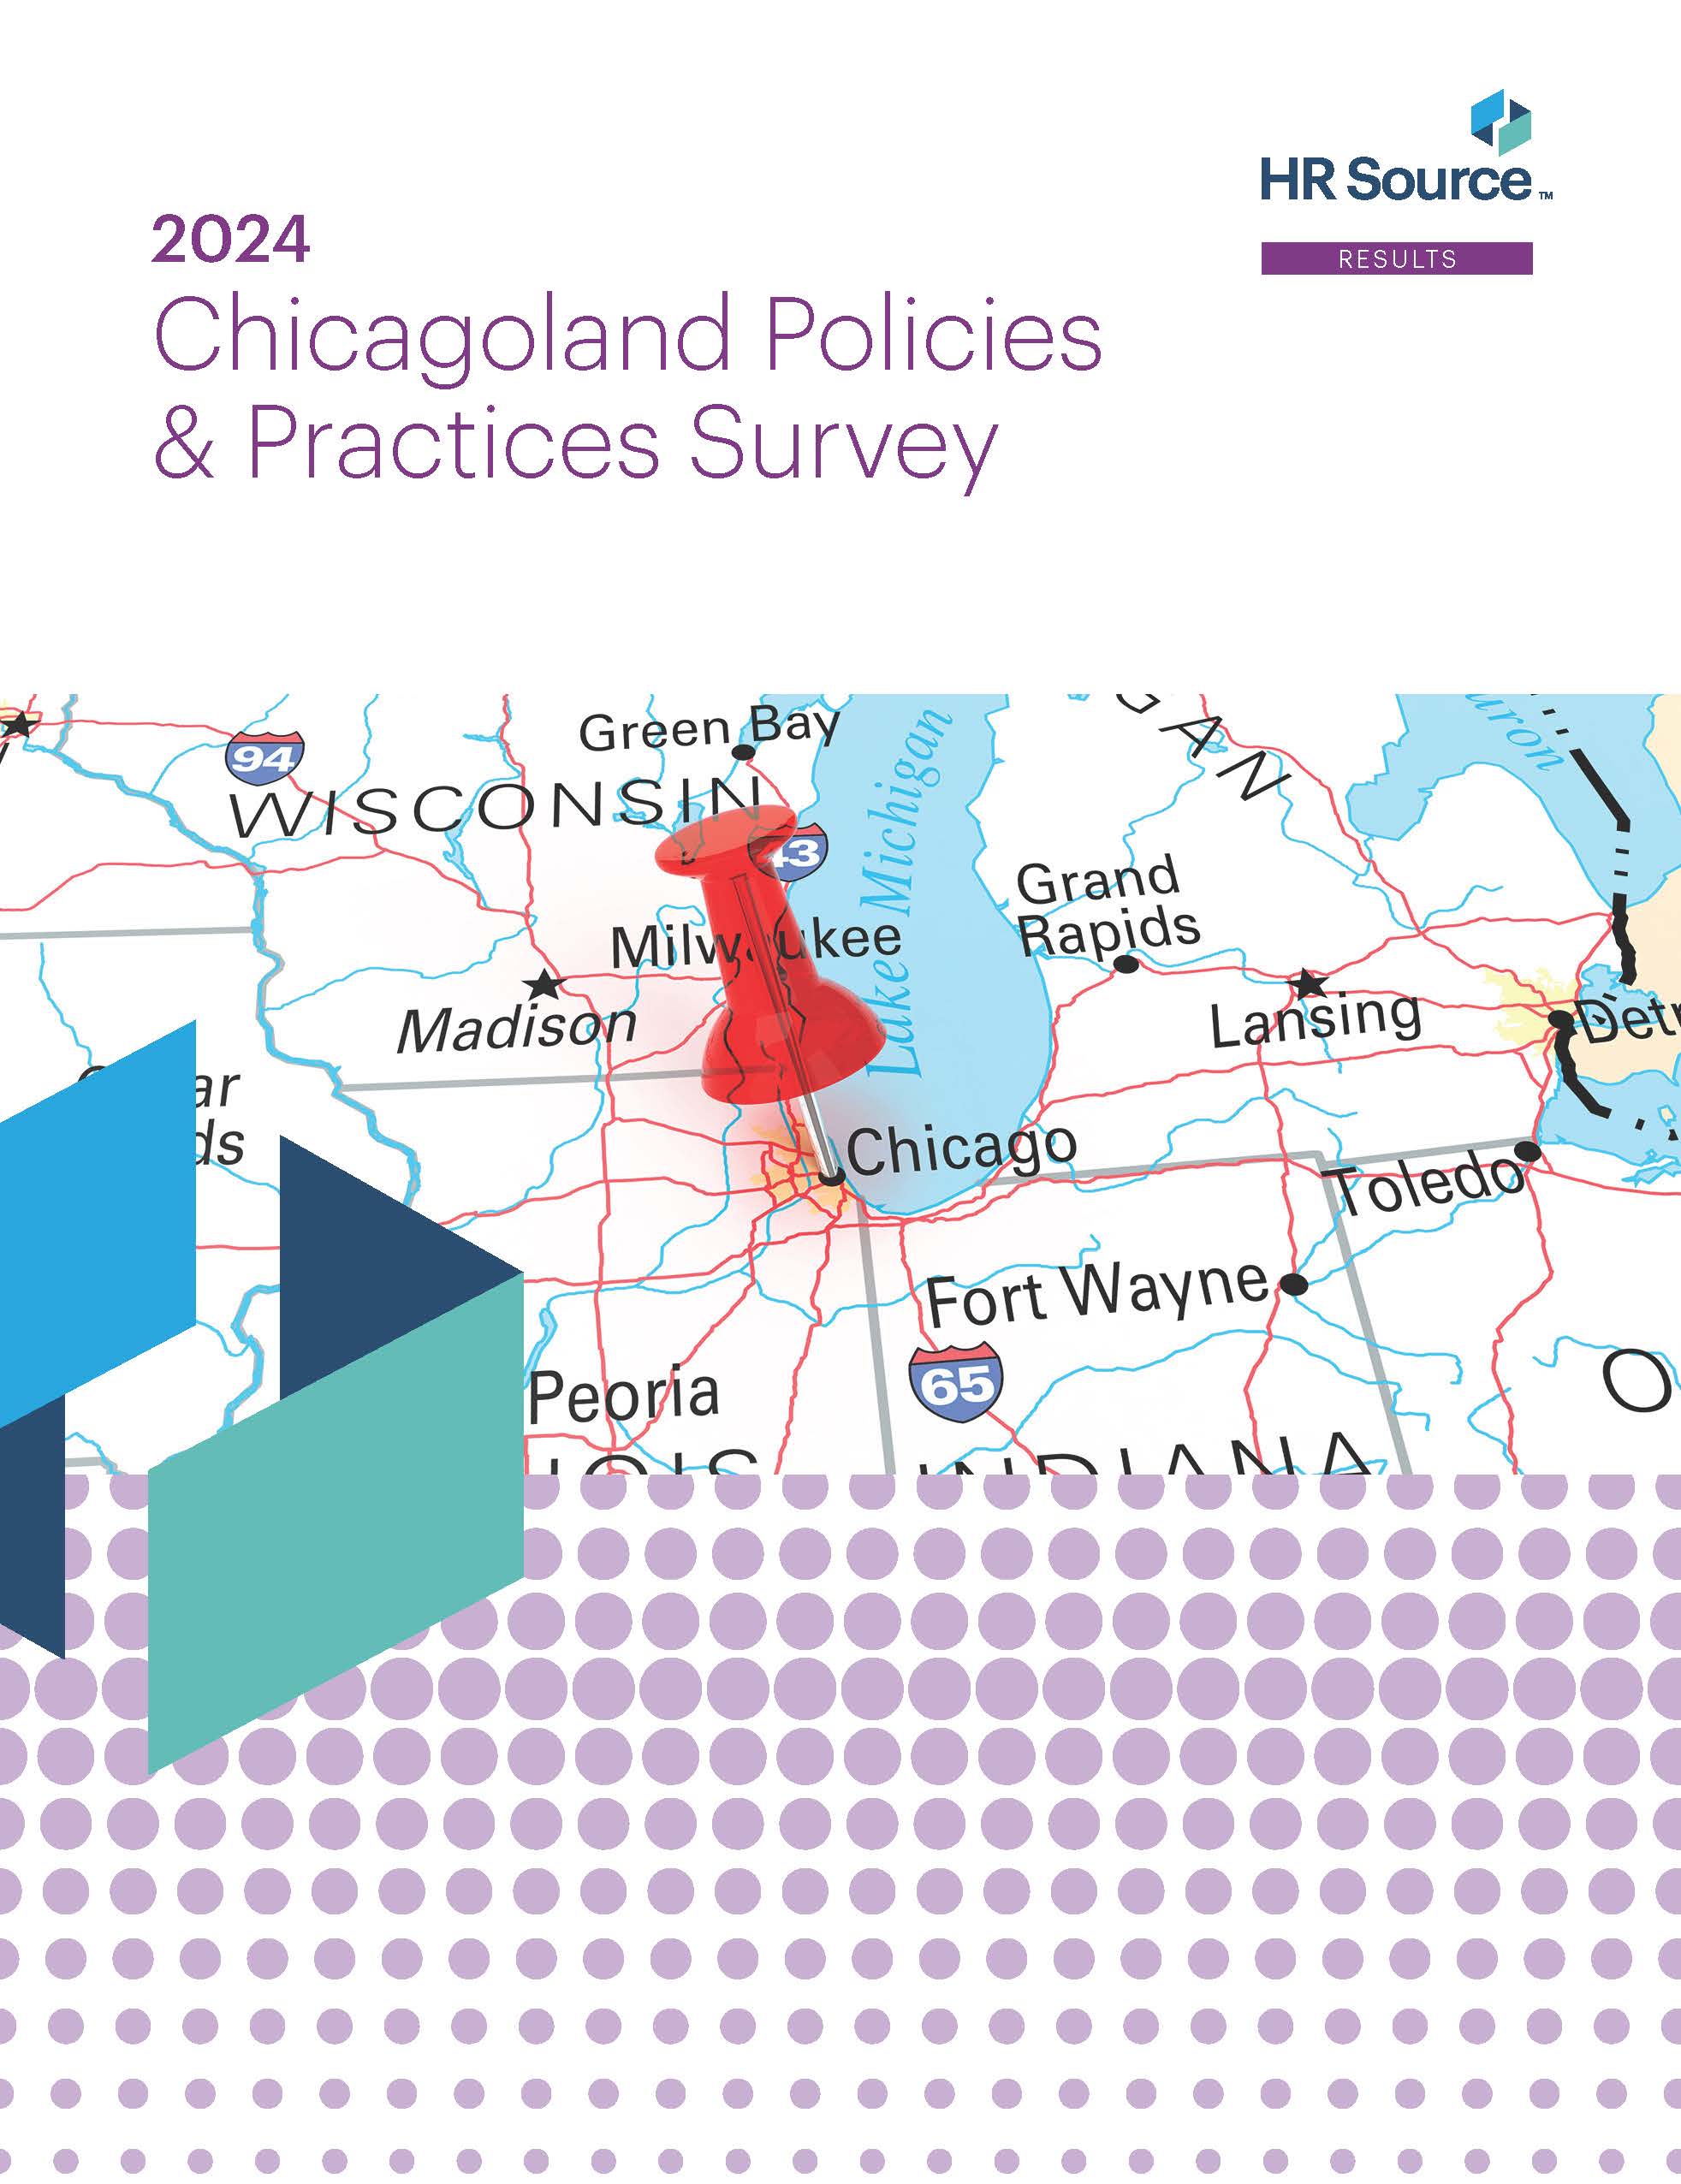 Chicagoland Policies and Practices Survey 2024